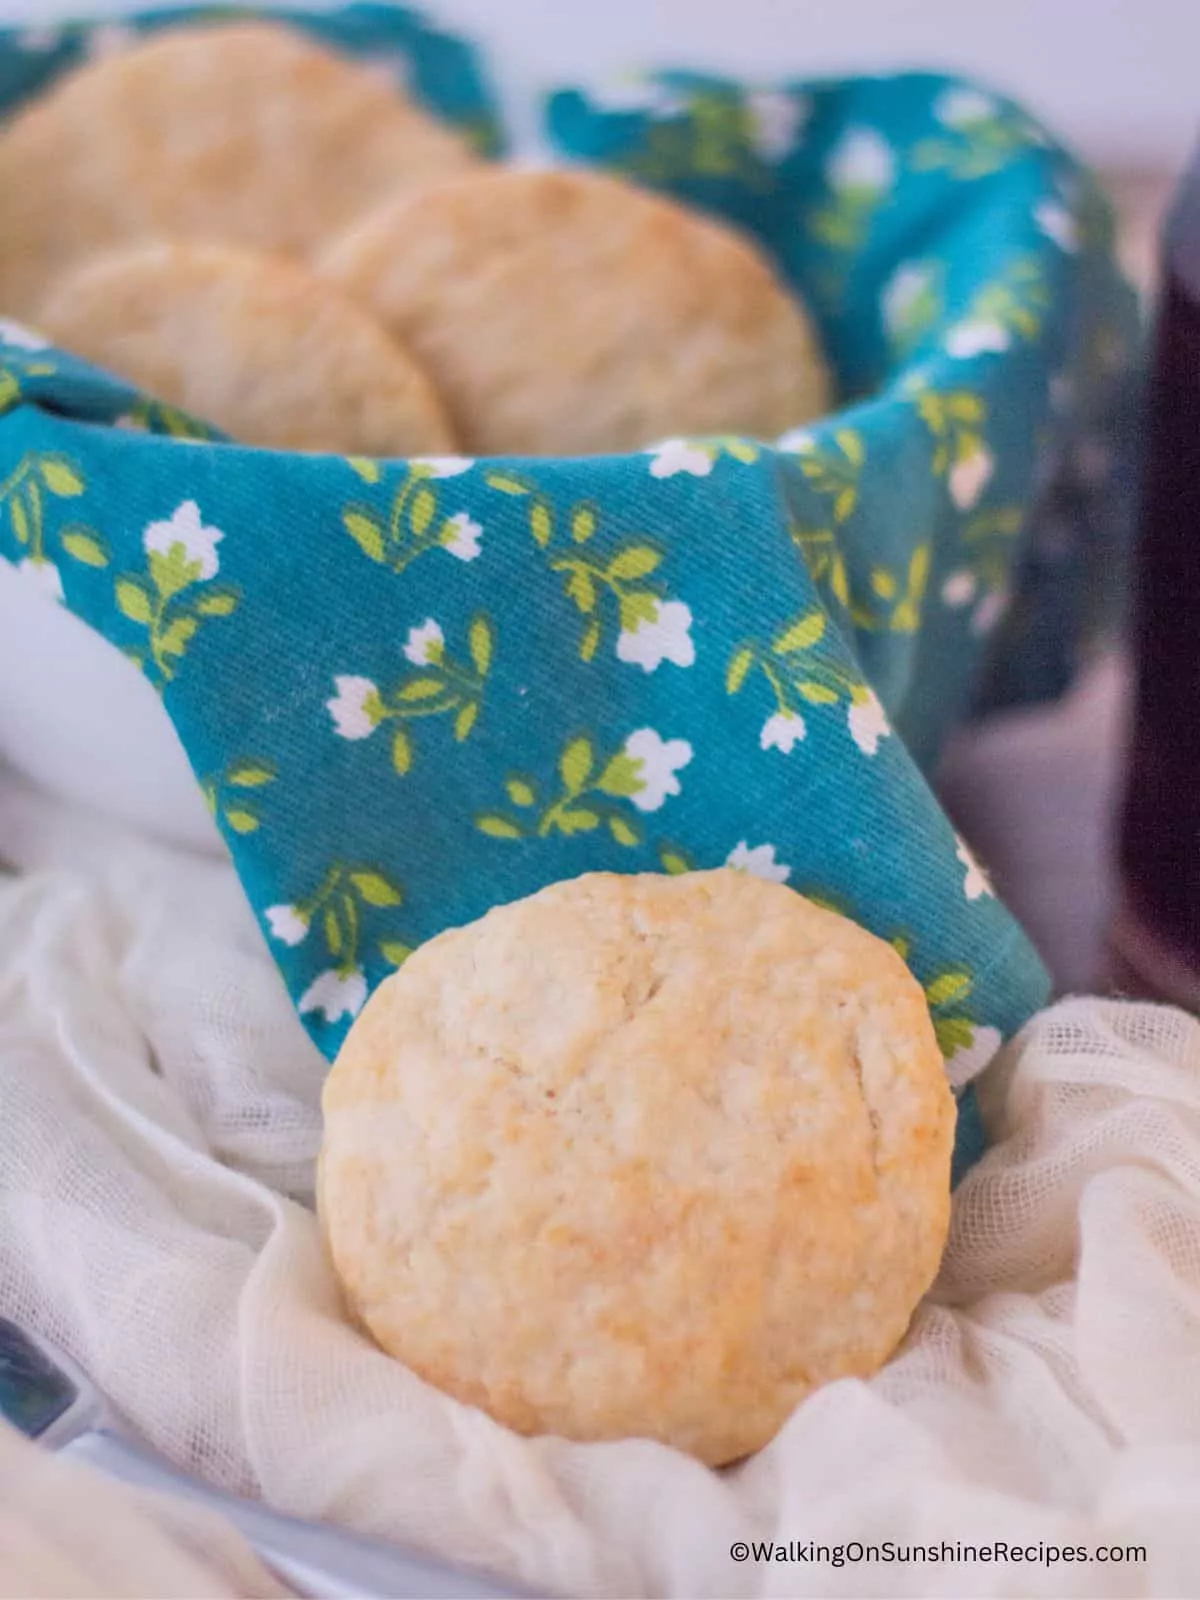 homemade biscuits in basket with aqua napkin.